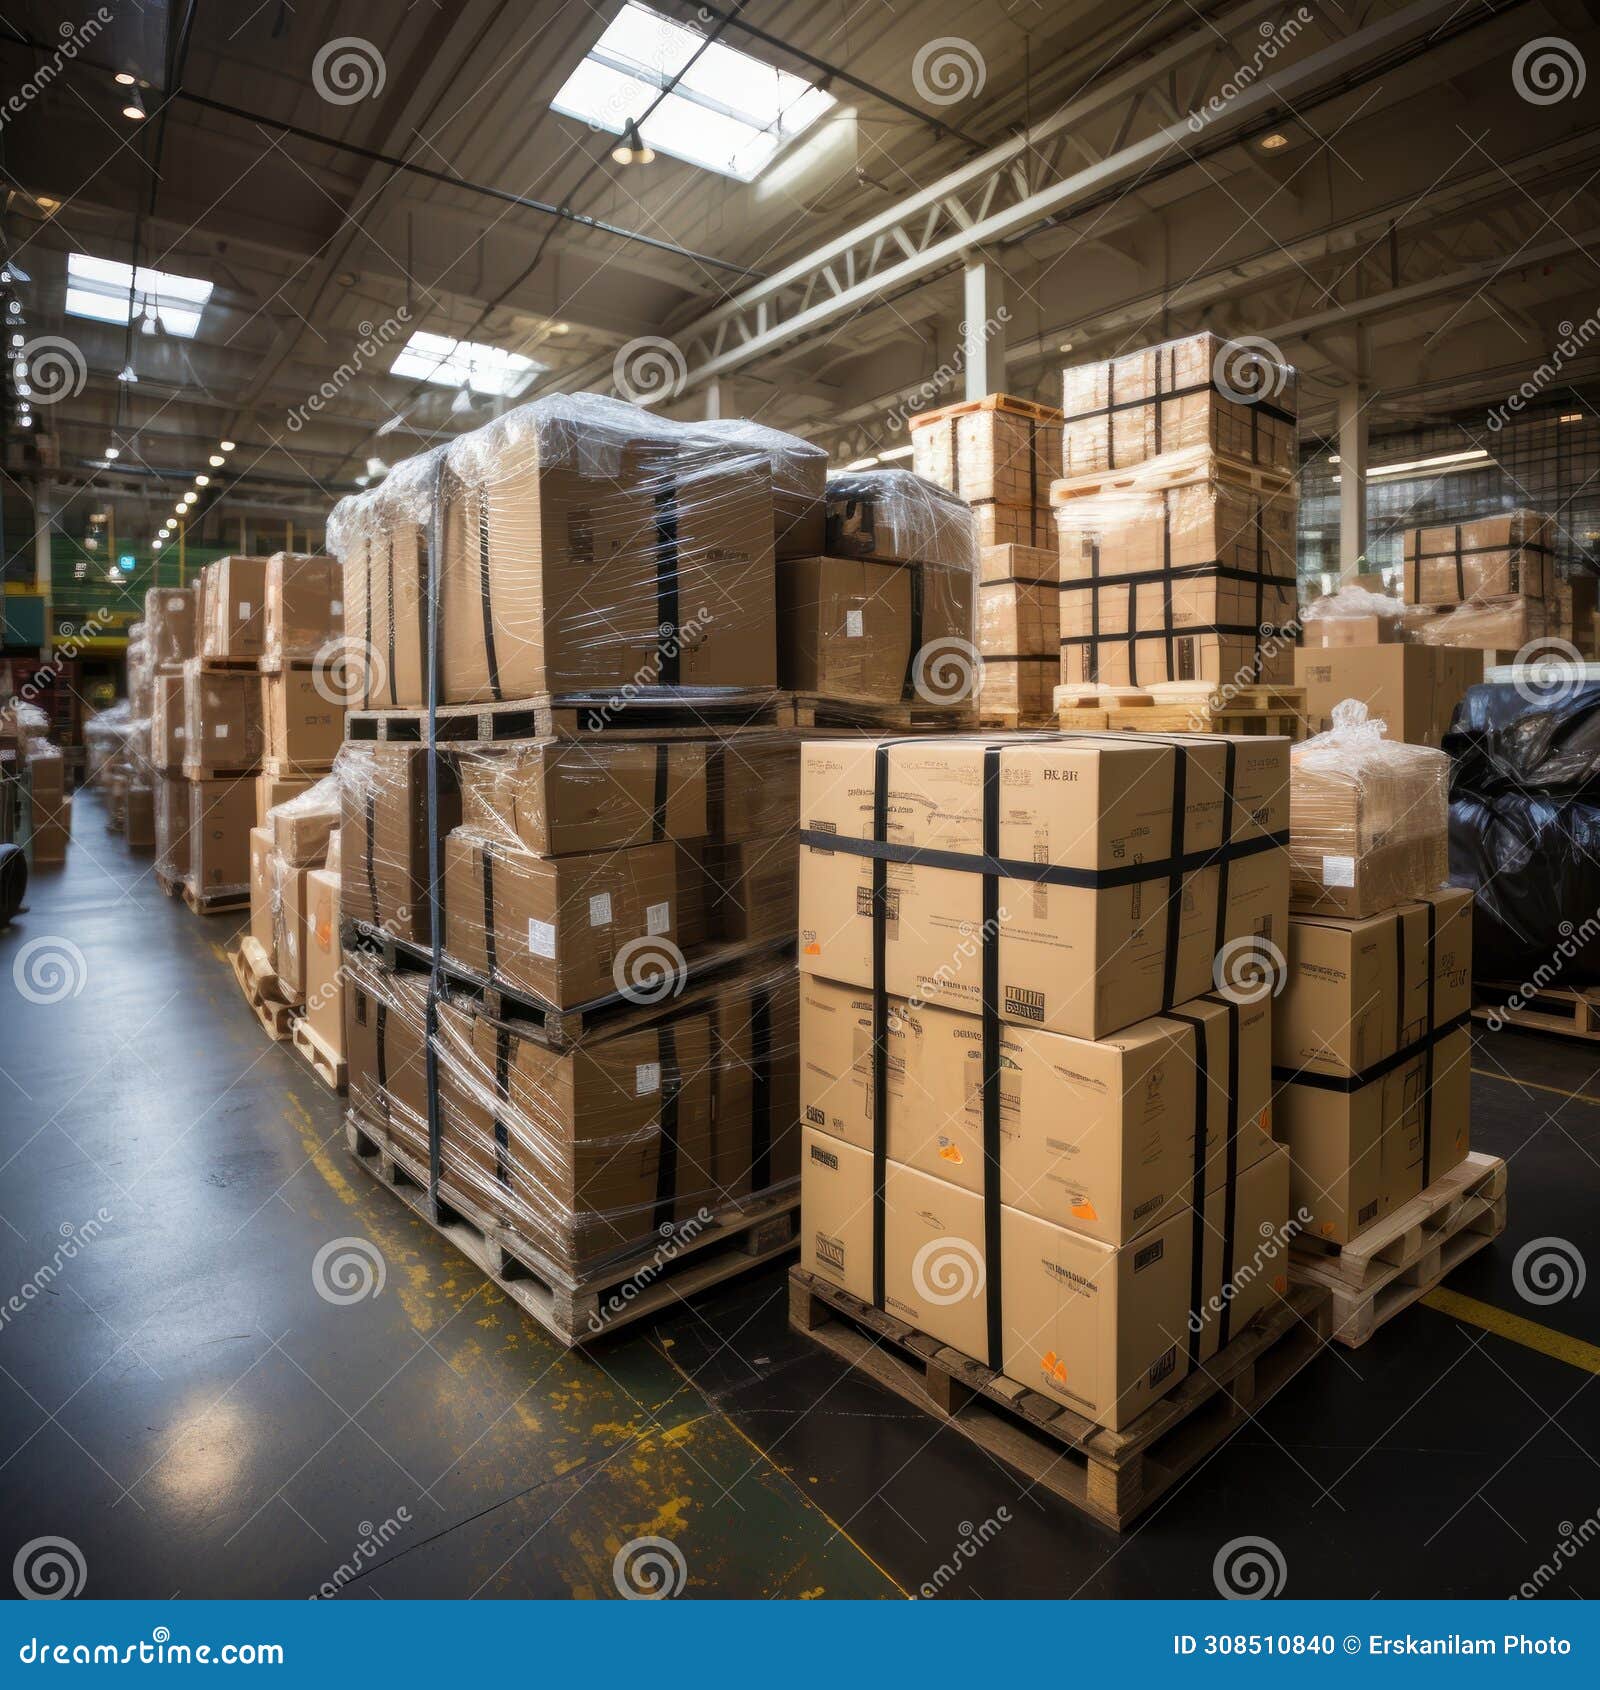 boxes and cardboard in storage warehouses for export and import expeditions